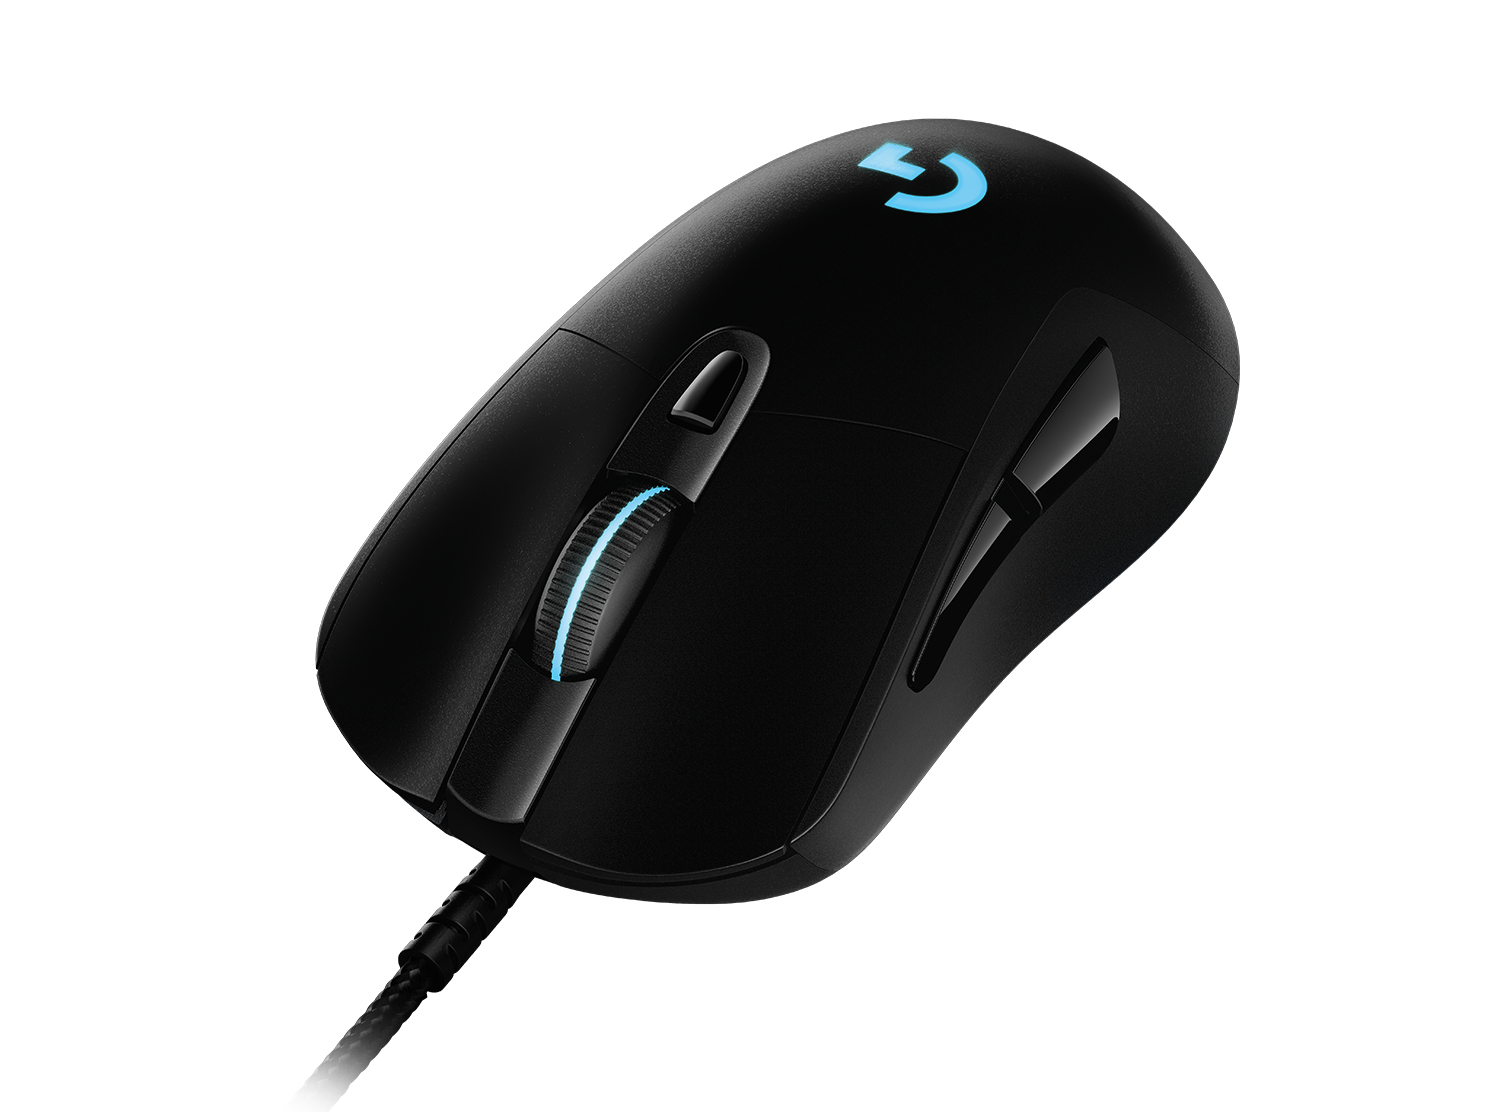 Logitech G 910-005633 G403 HERO 16K Gaming Mouse/LIGHTSYNC RGB/Lightweight 87g+10g Optional/Braided Cable/16000 DPI/Rubber Side Grips